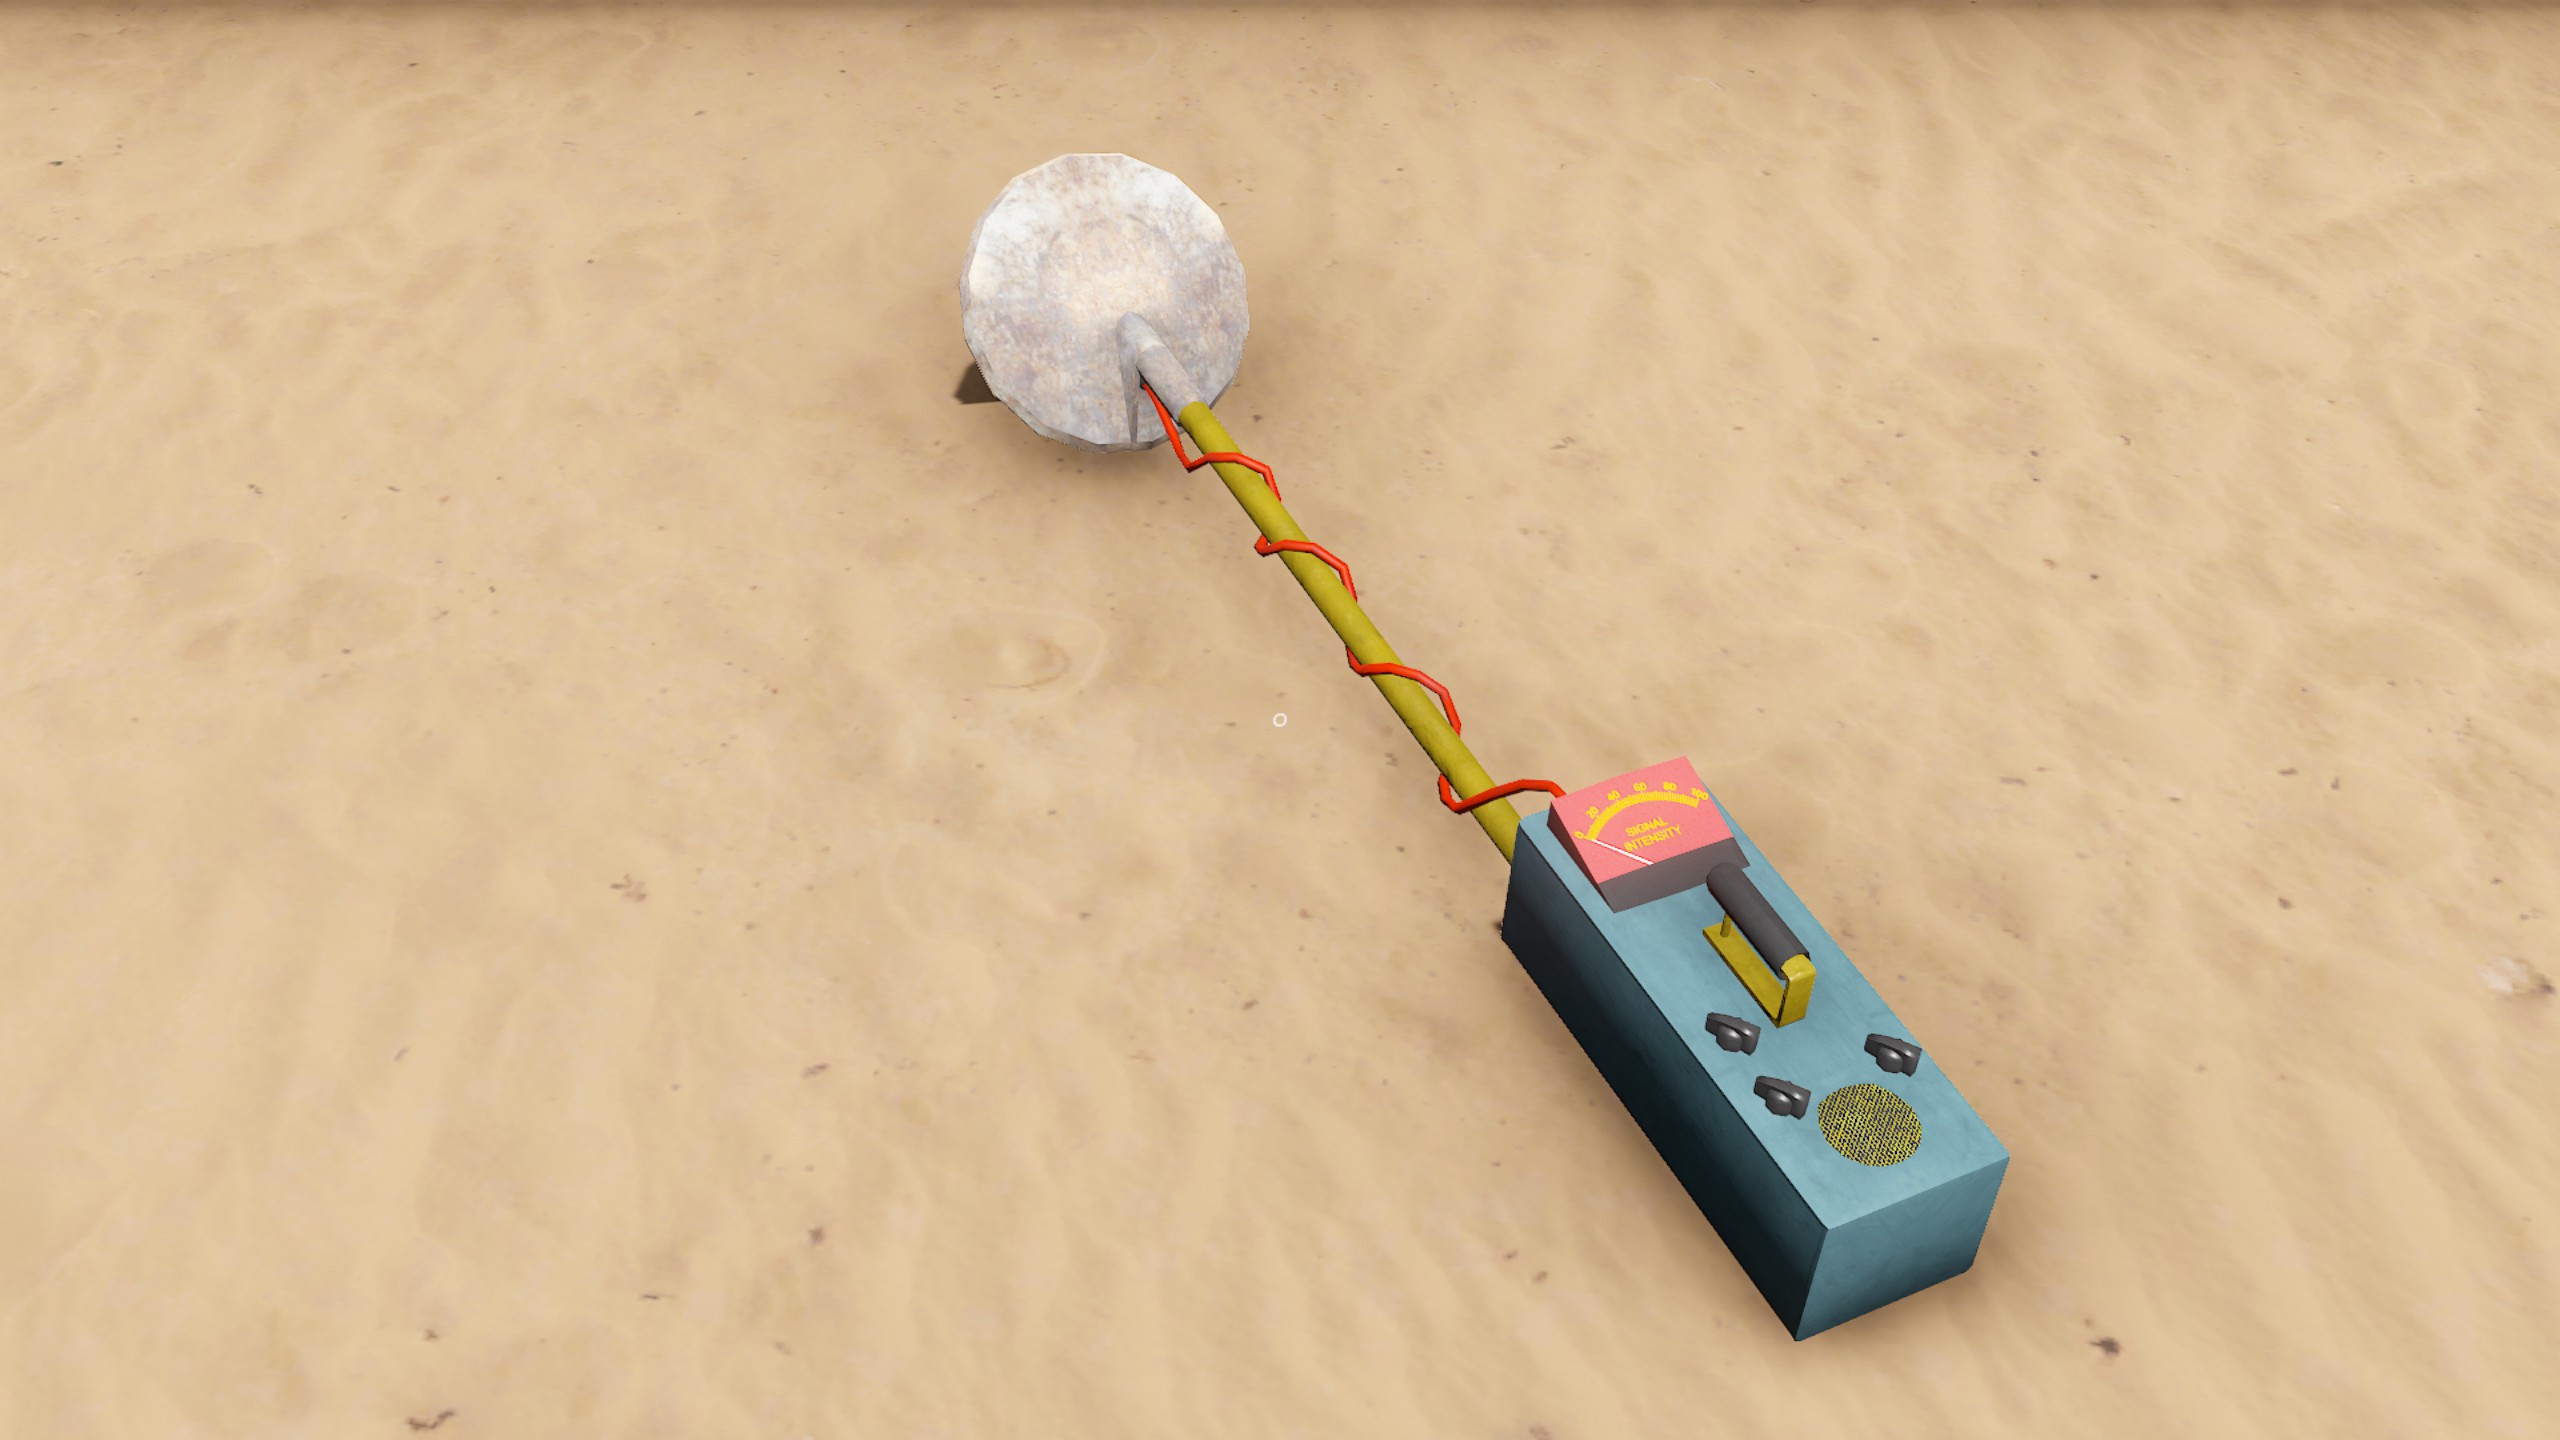 The Long Drive – Find treasure underground with a metal detector